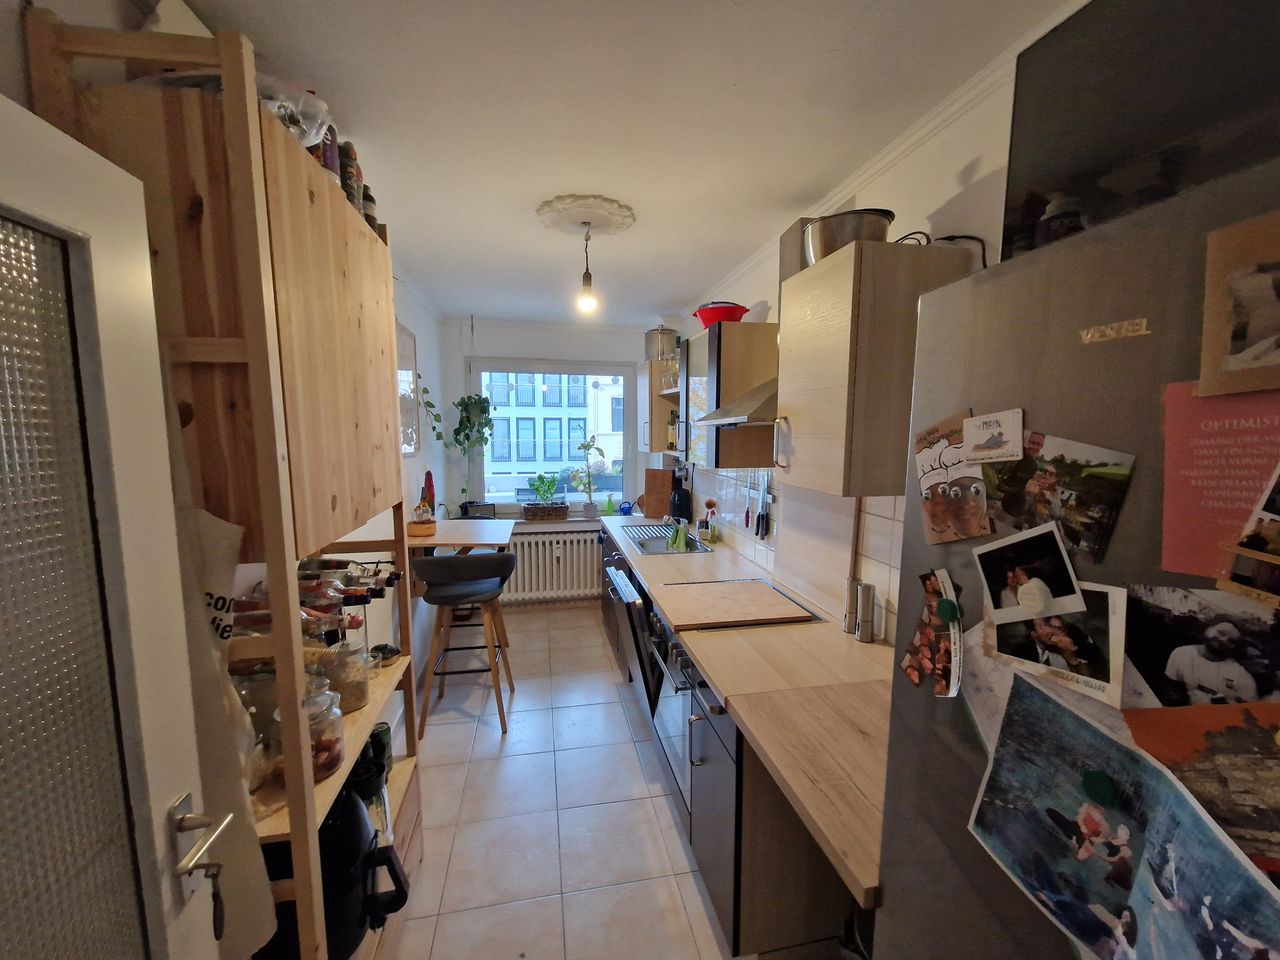 Charming 100sqm in the heart of Cologne / 2 balconies, 4 rooms